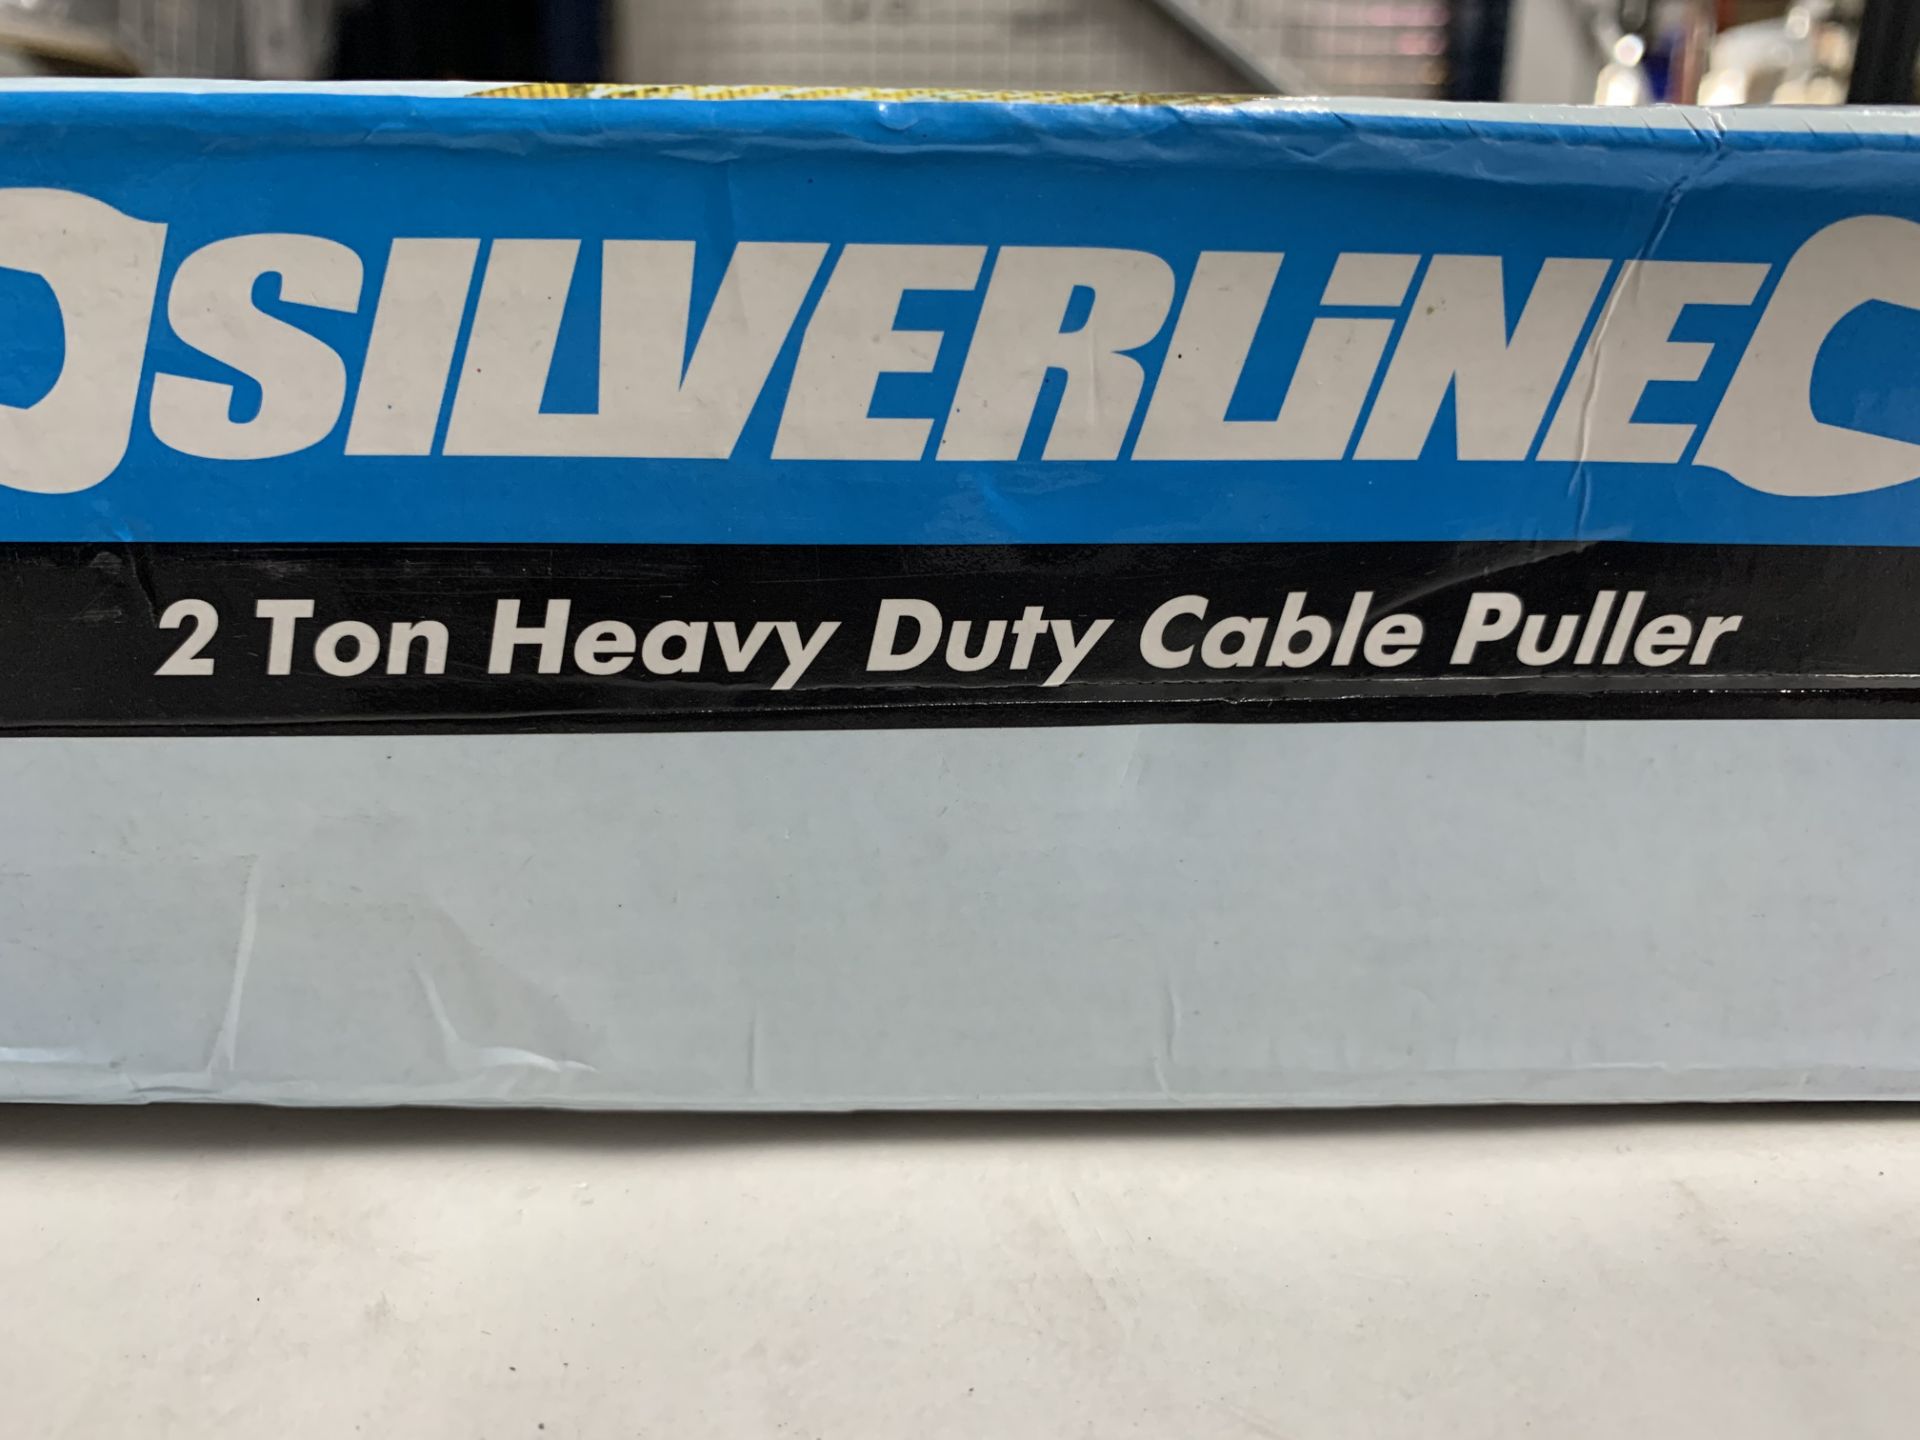 Silverline 2 ton heavy duty cable puller - Image 2 of 2